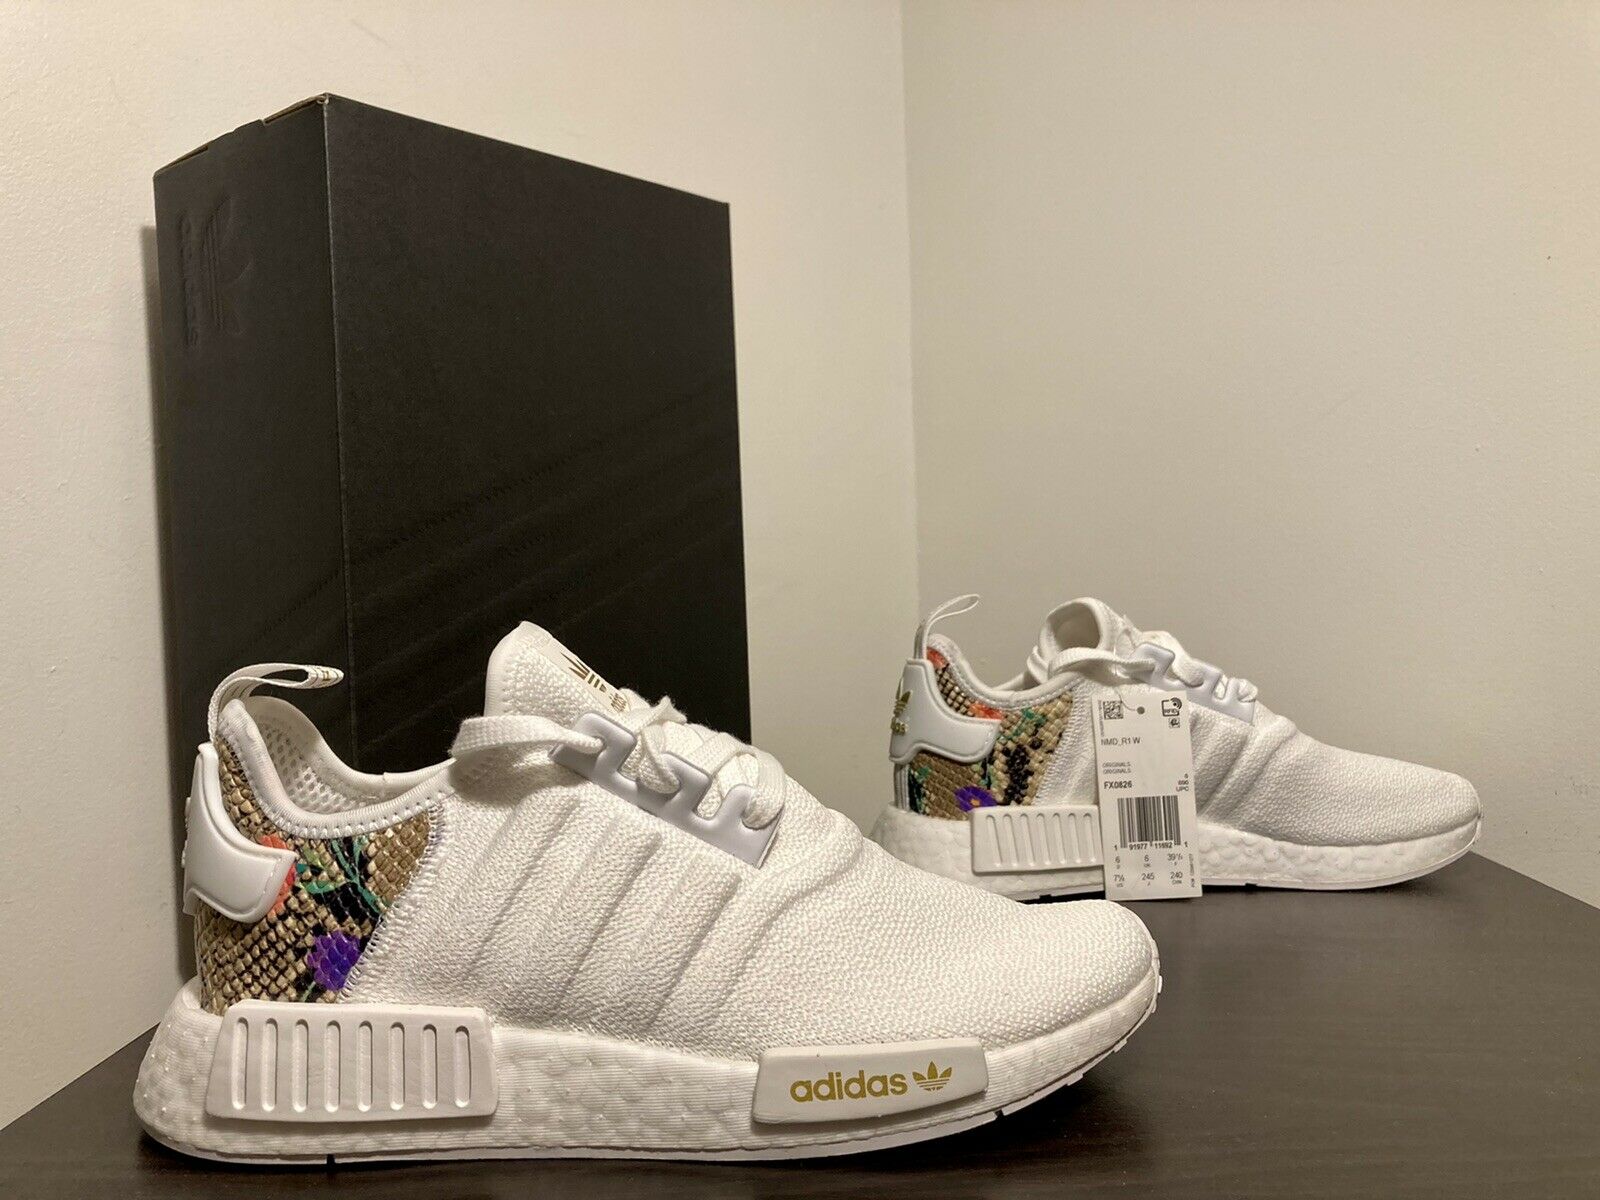 Adidas NMD_R1 White Floral Snake Women's Shoes Size 7.5 FX0826